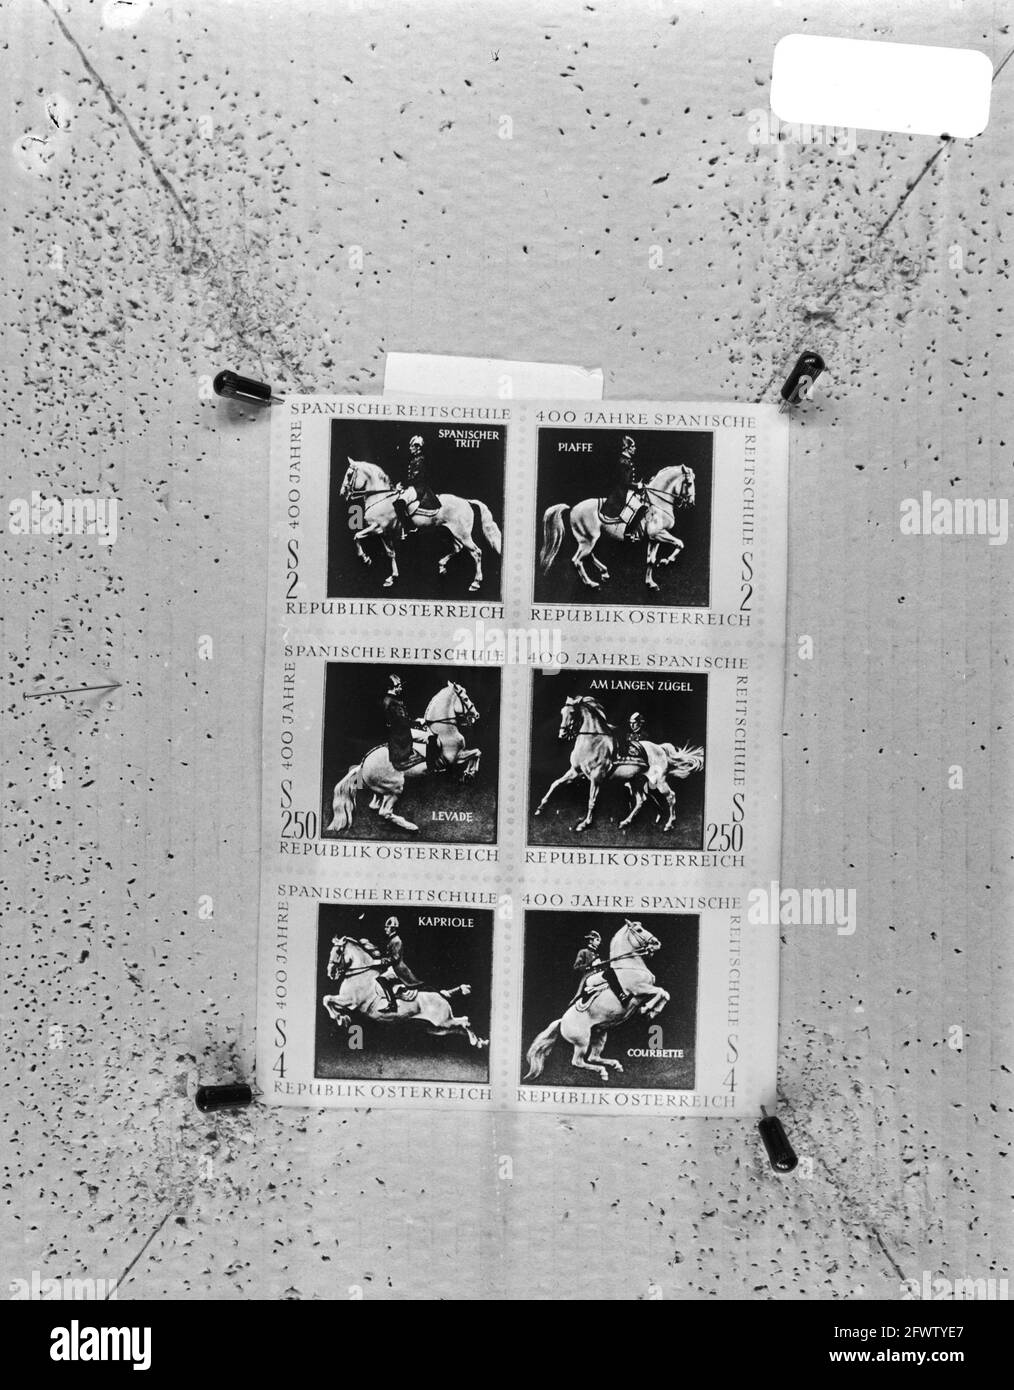 Austrian stamps of Spanische Reitschule, December 13, 1971, POSTAGE STAMPS, The Netherlands, 20th century press agency photo, news to remember, documentary, historic photography 1945-1990, visual stories, human history of the Twentieth Century, capturing moments in time Stock Photo